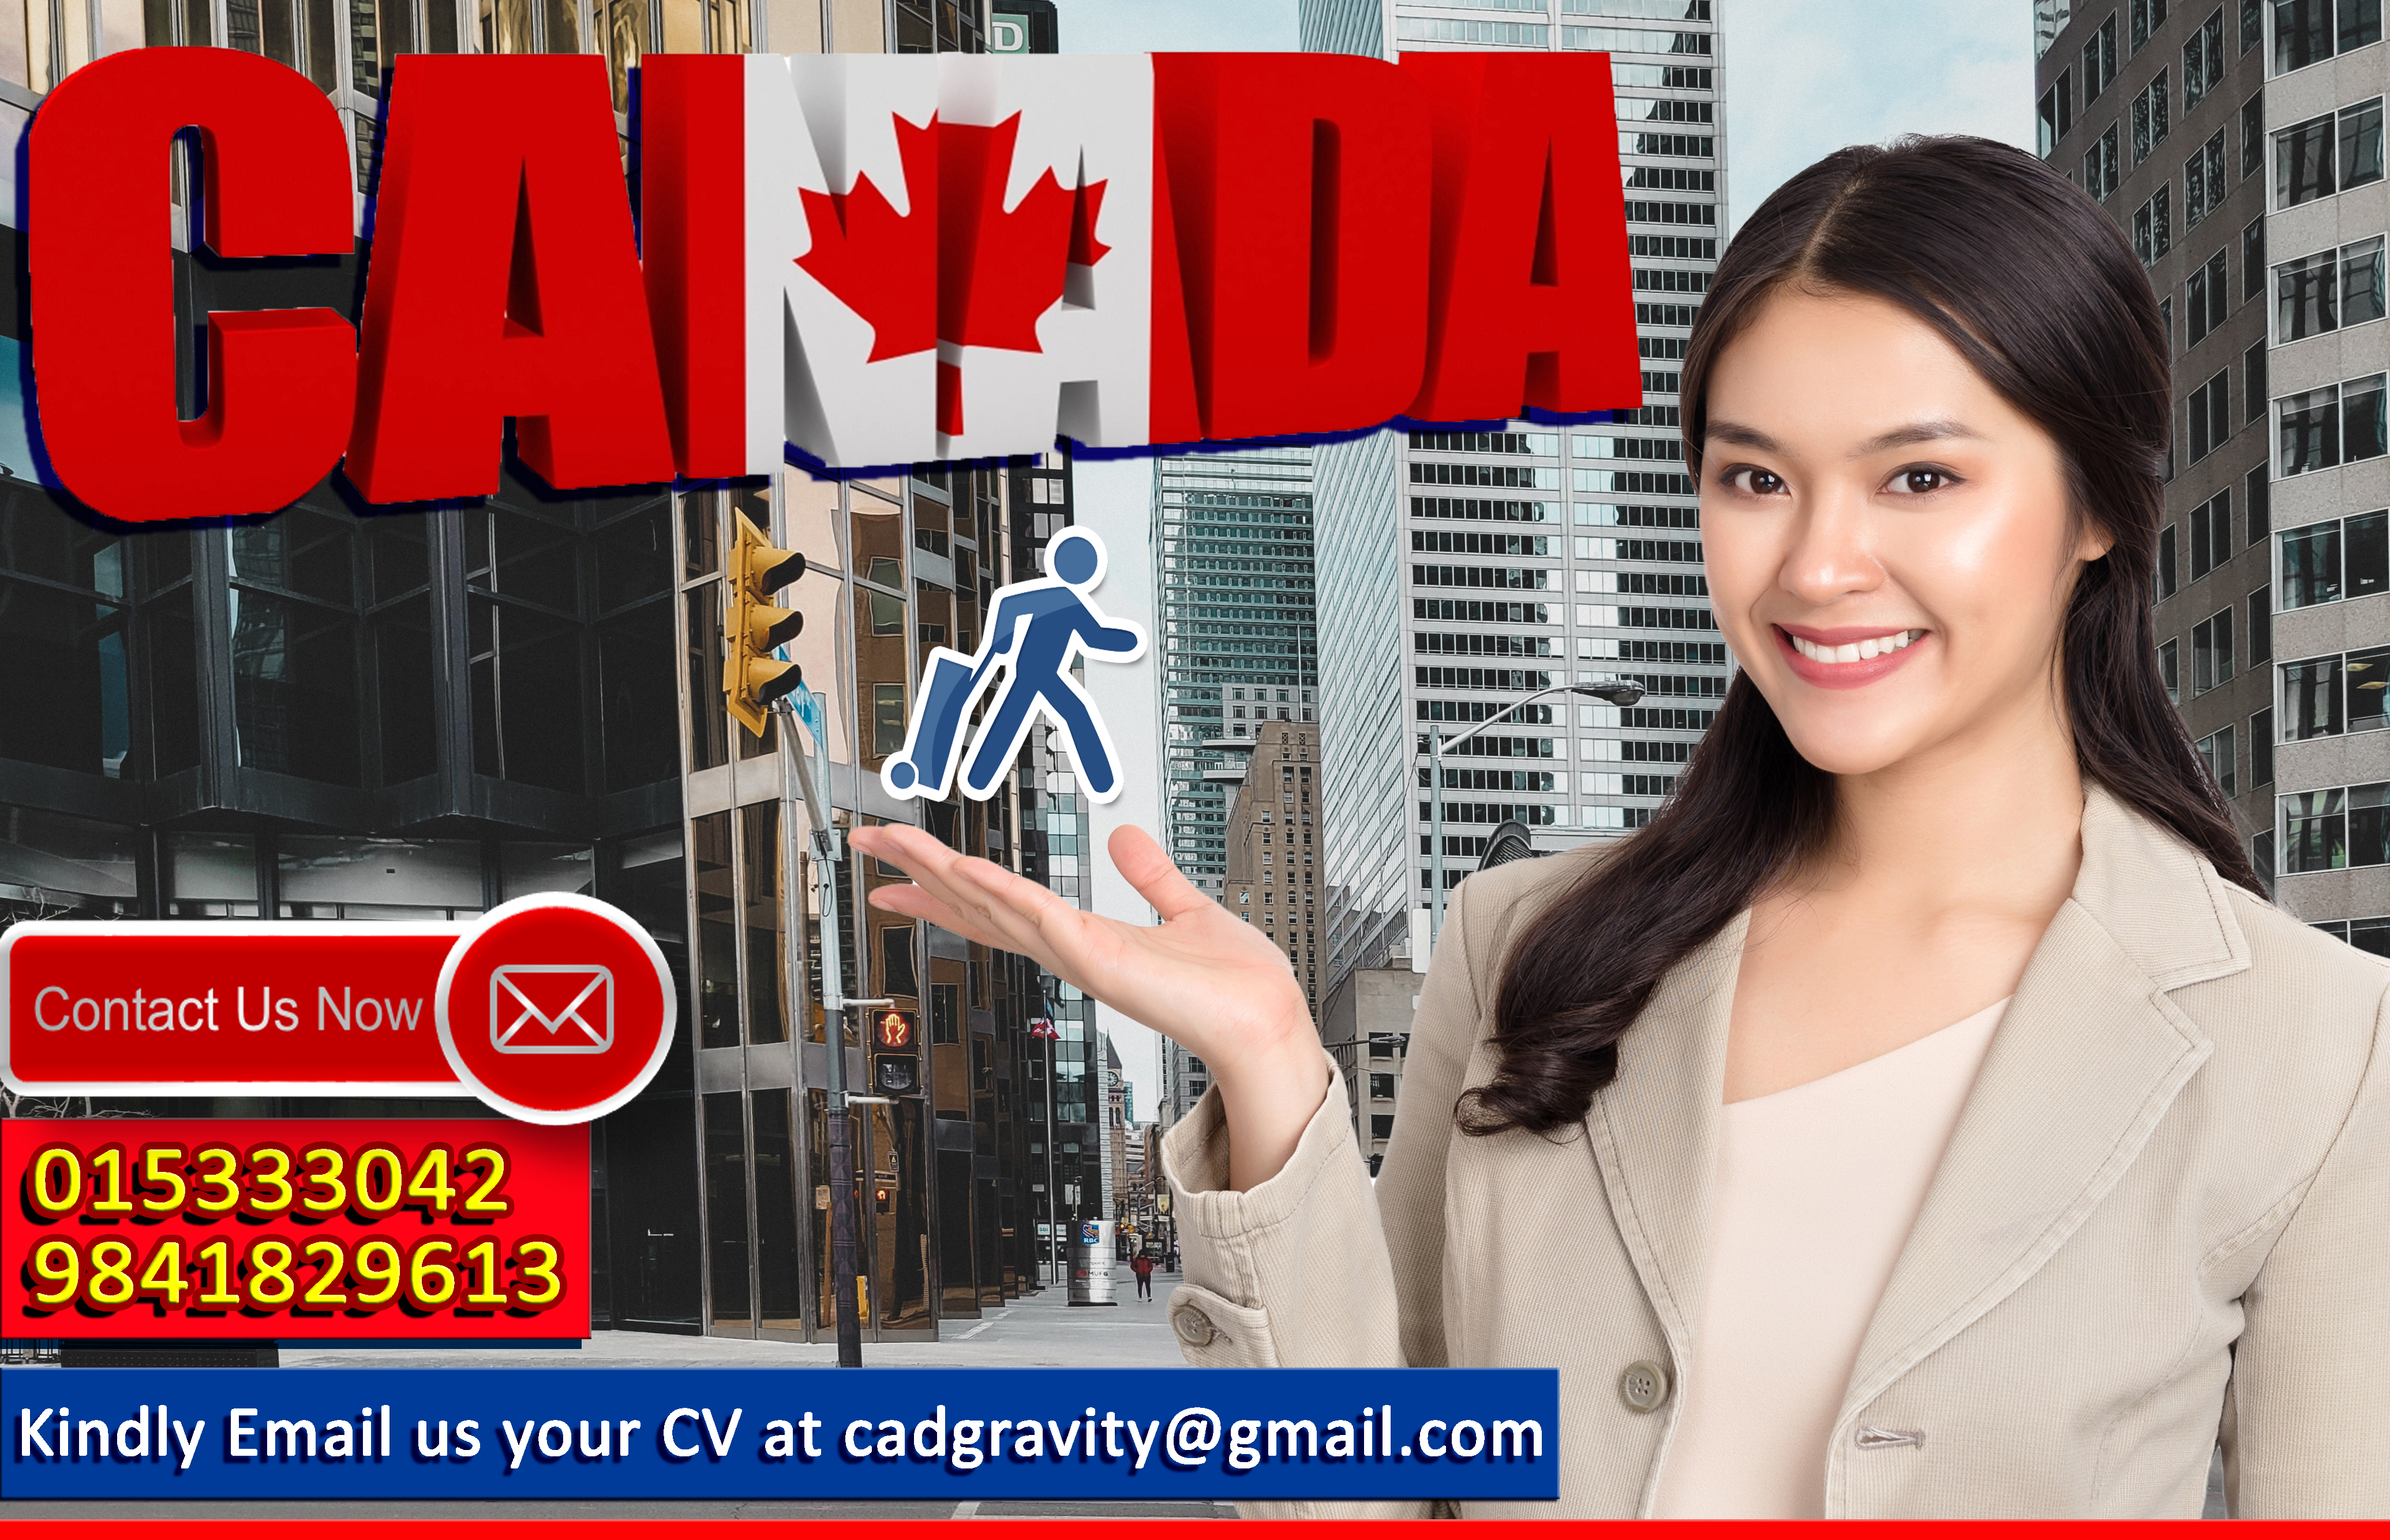 About Express Entry Canada